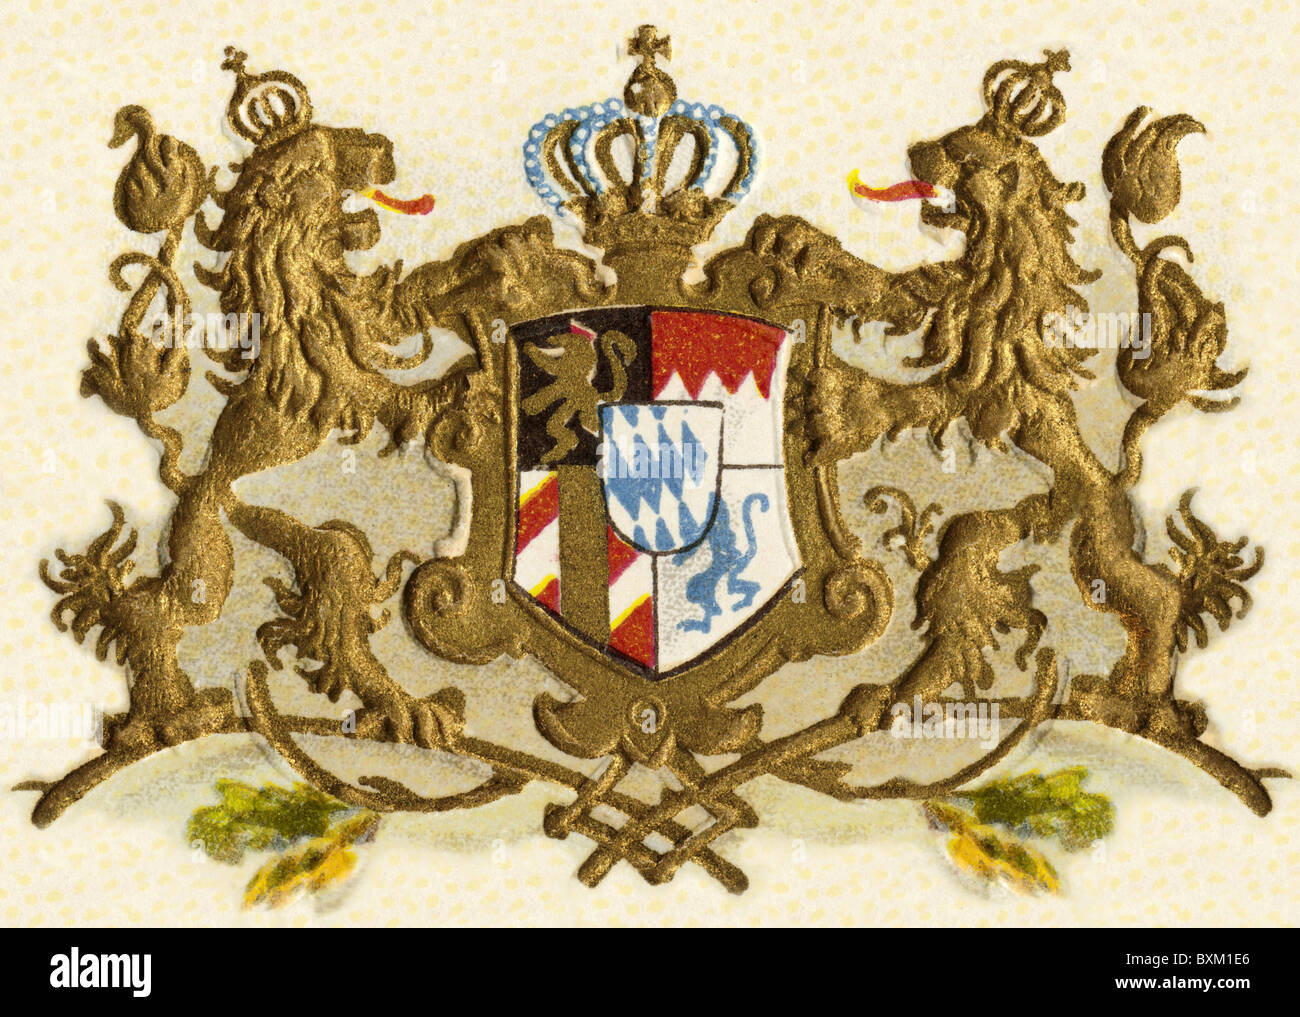 heraldry, coat of arms, Bavaria kingdom, national arms, Germany, lithograph, 1900, Additional-Rights-Clearences-Not Available Stock Photo